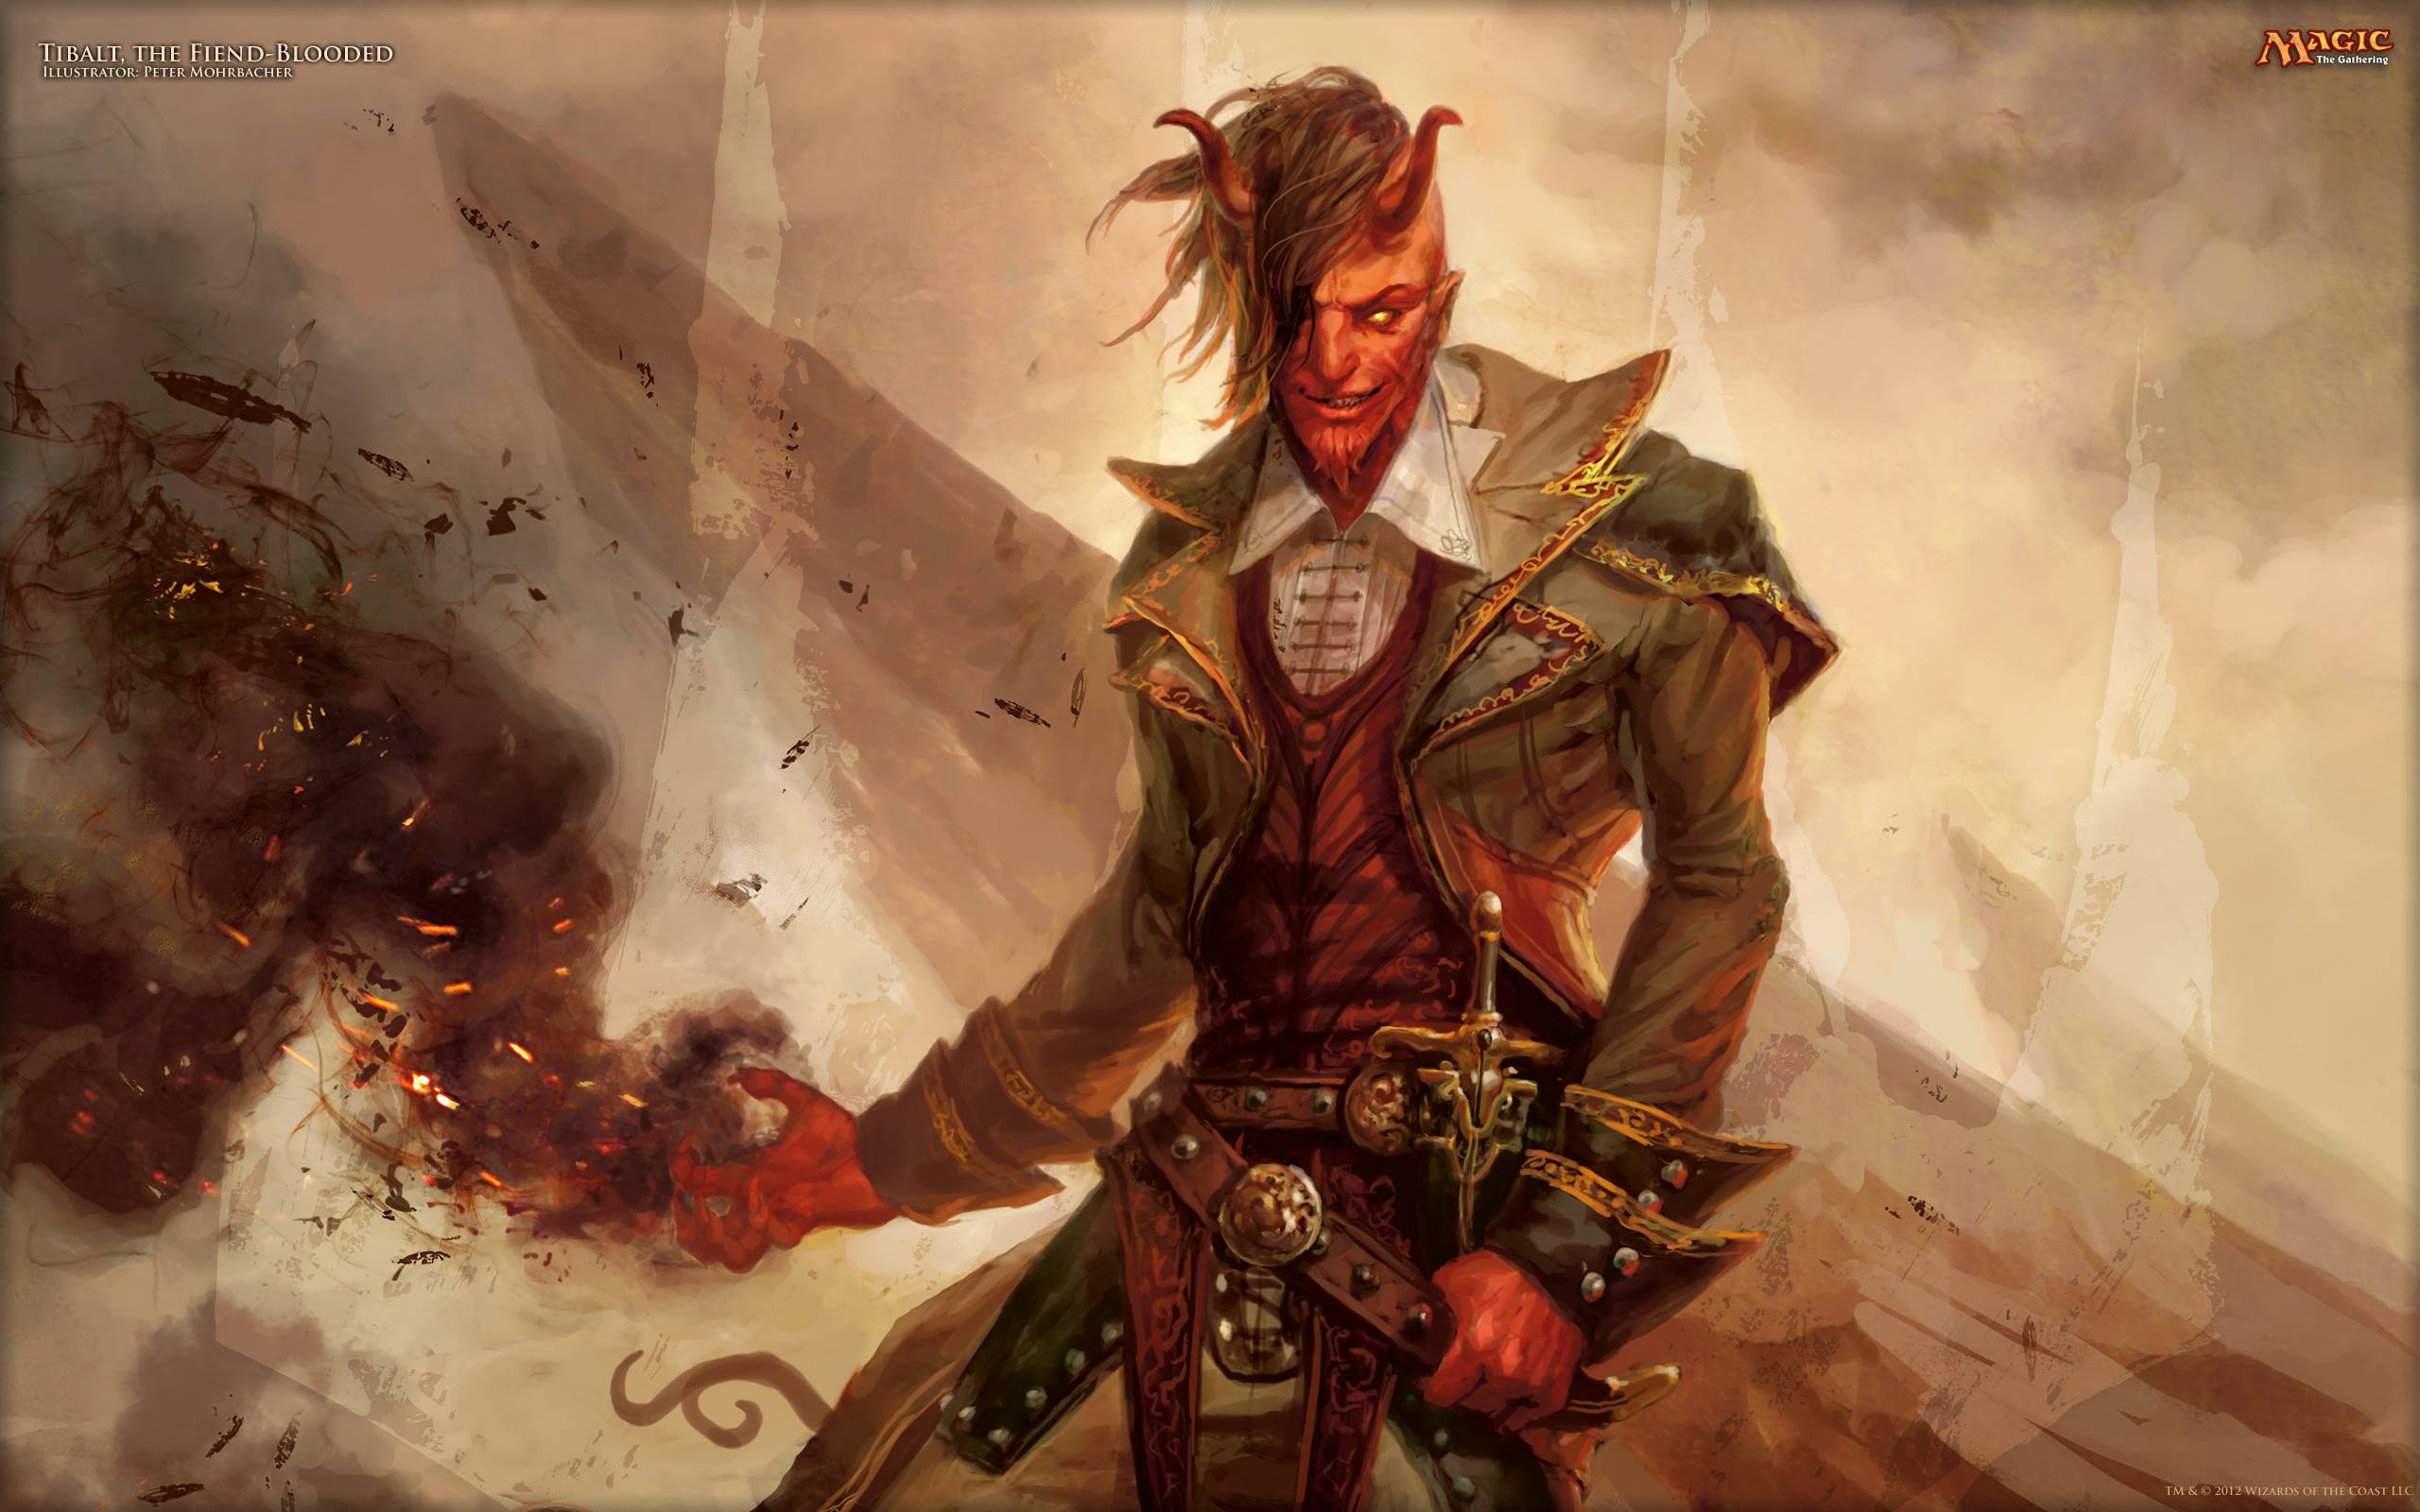 Wallpaper Of The Week: Tibalt, The Fiend Blooded, Daily MTG